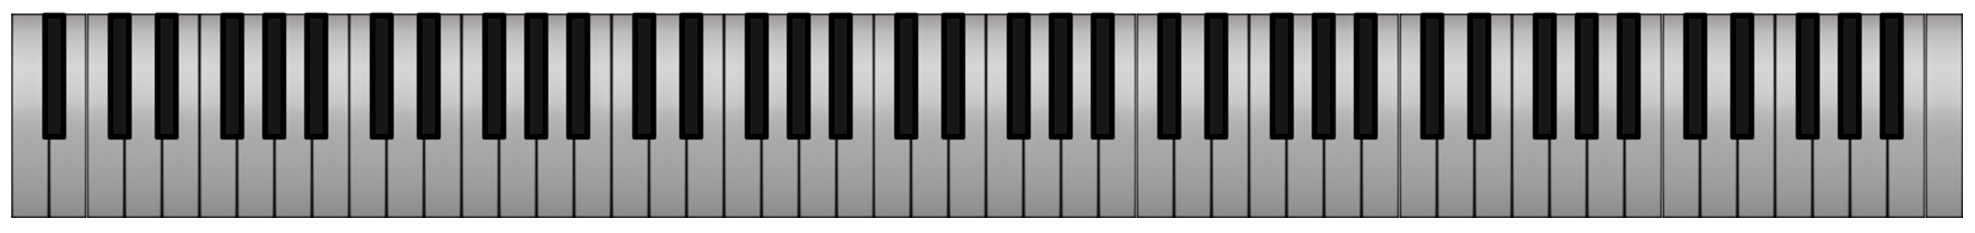 Simple Piano | OpenGameArt.org